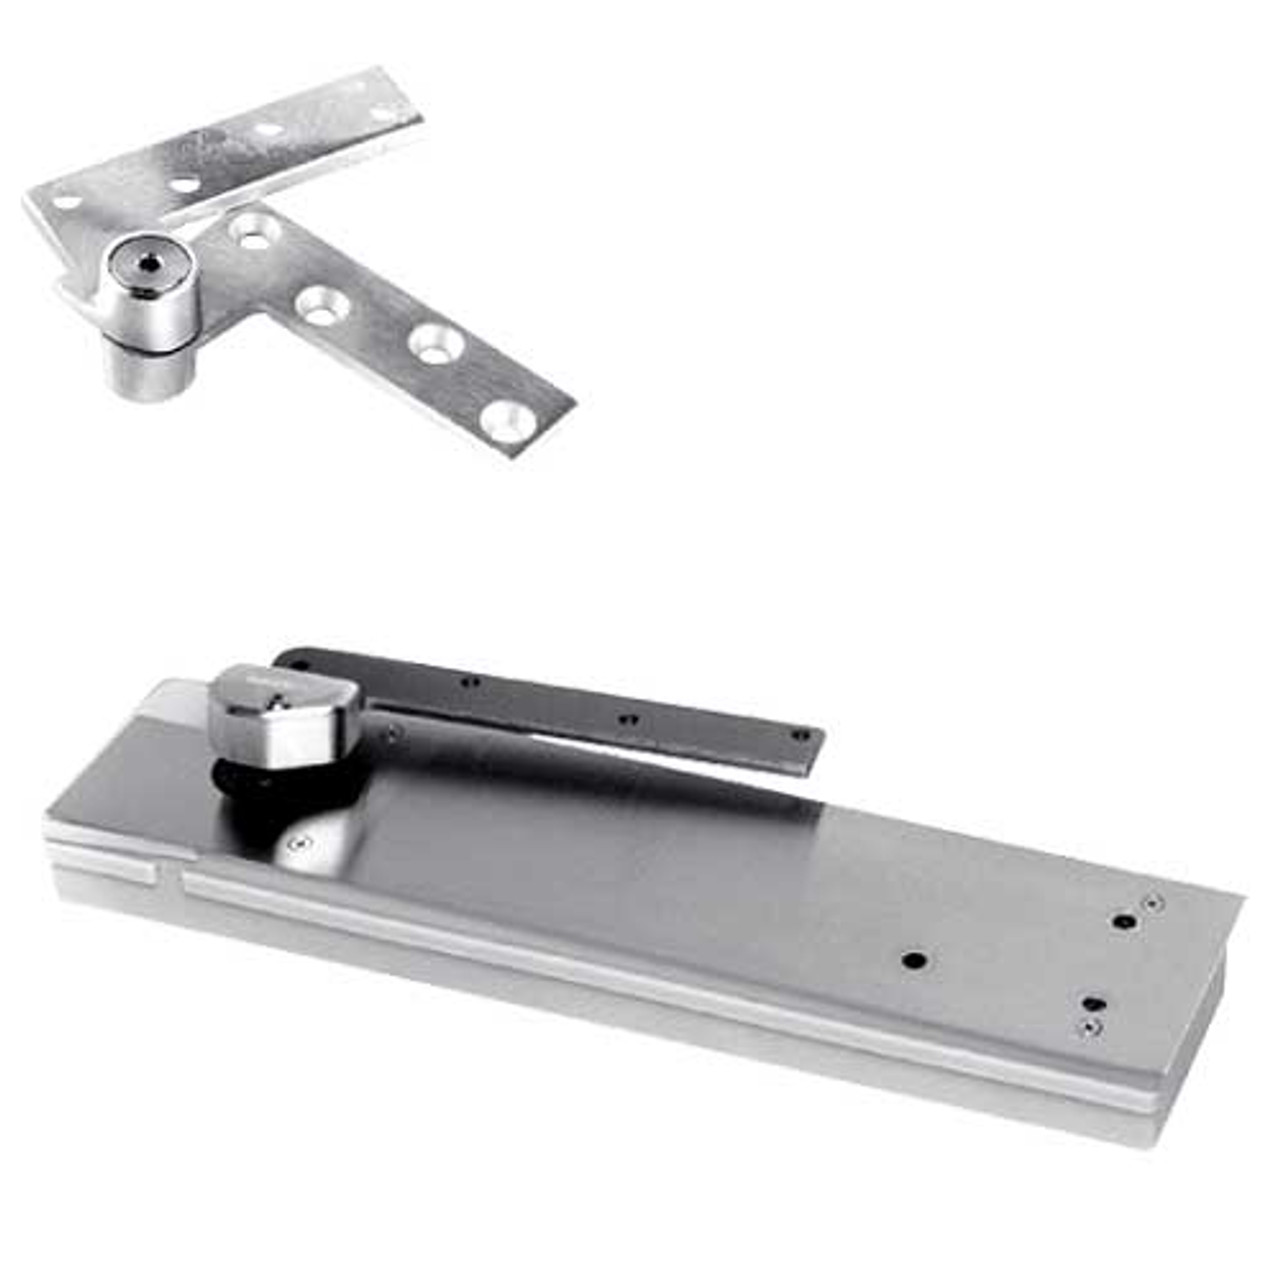 5103ABC180-1-1/2OS-LFP-LTP-RH-625 Rixson 51 Series 1-1/2" Offset Hung Shallow Depth Floor Closers in Bright Chrome Finish